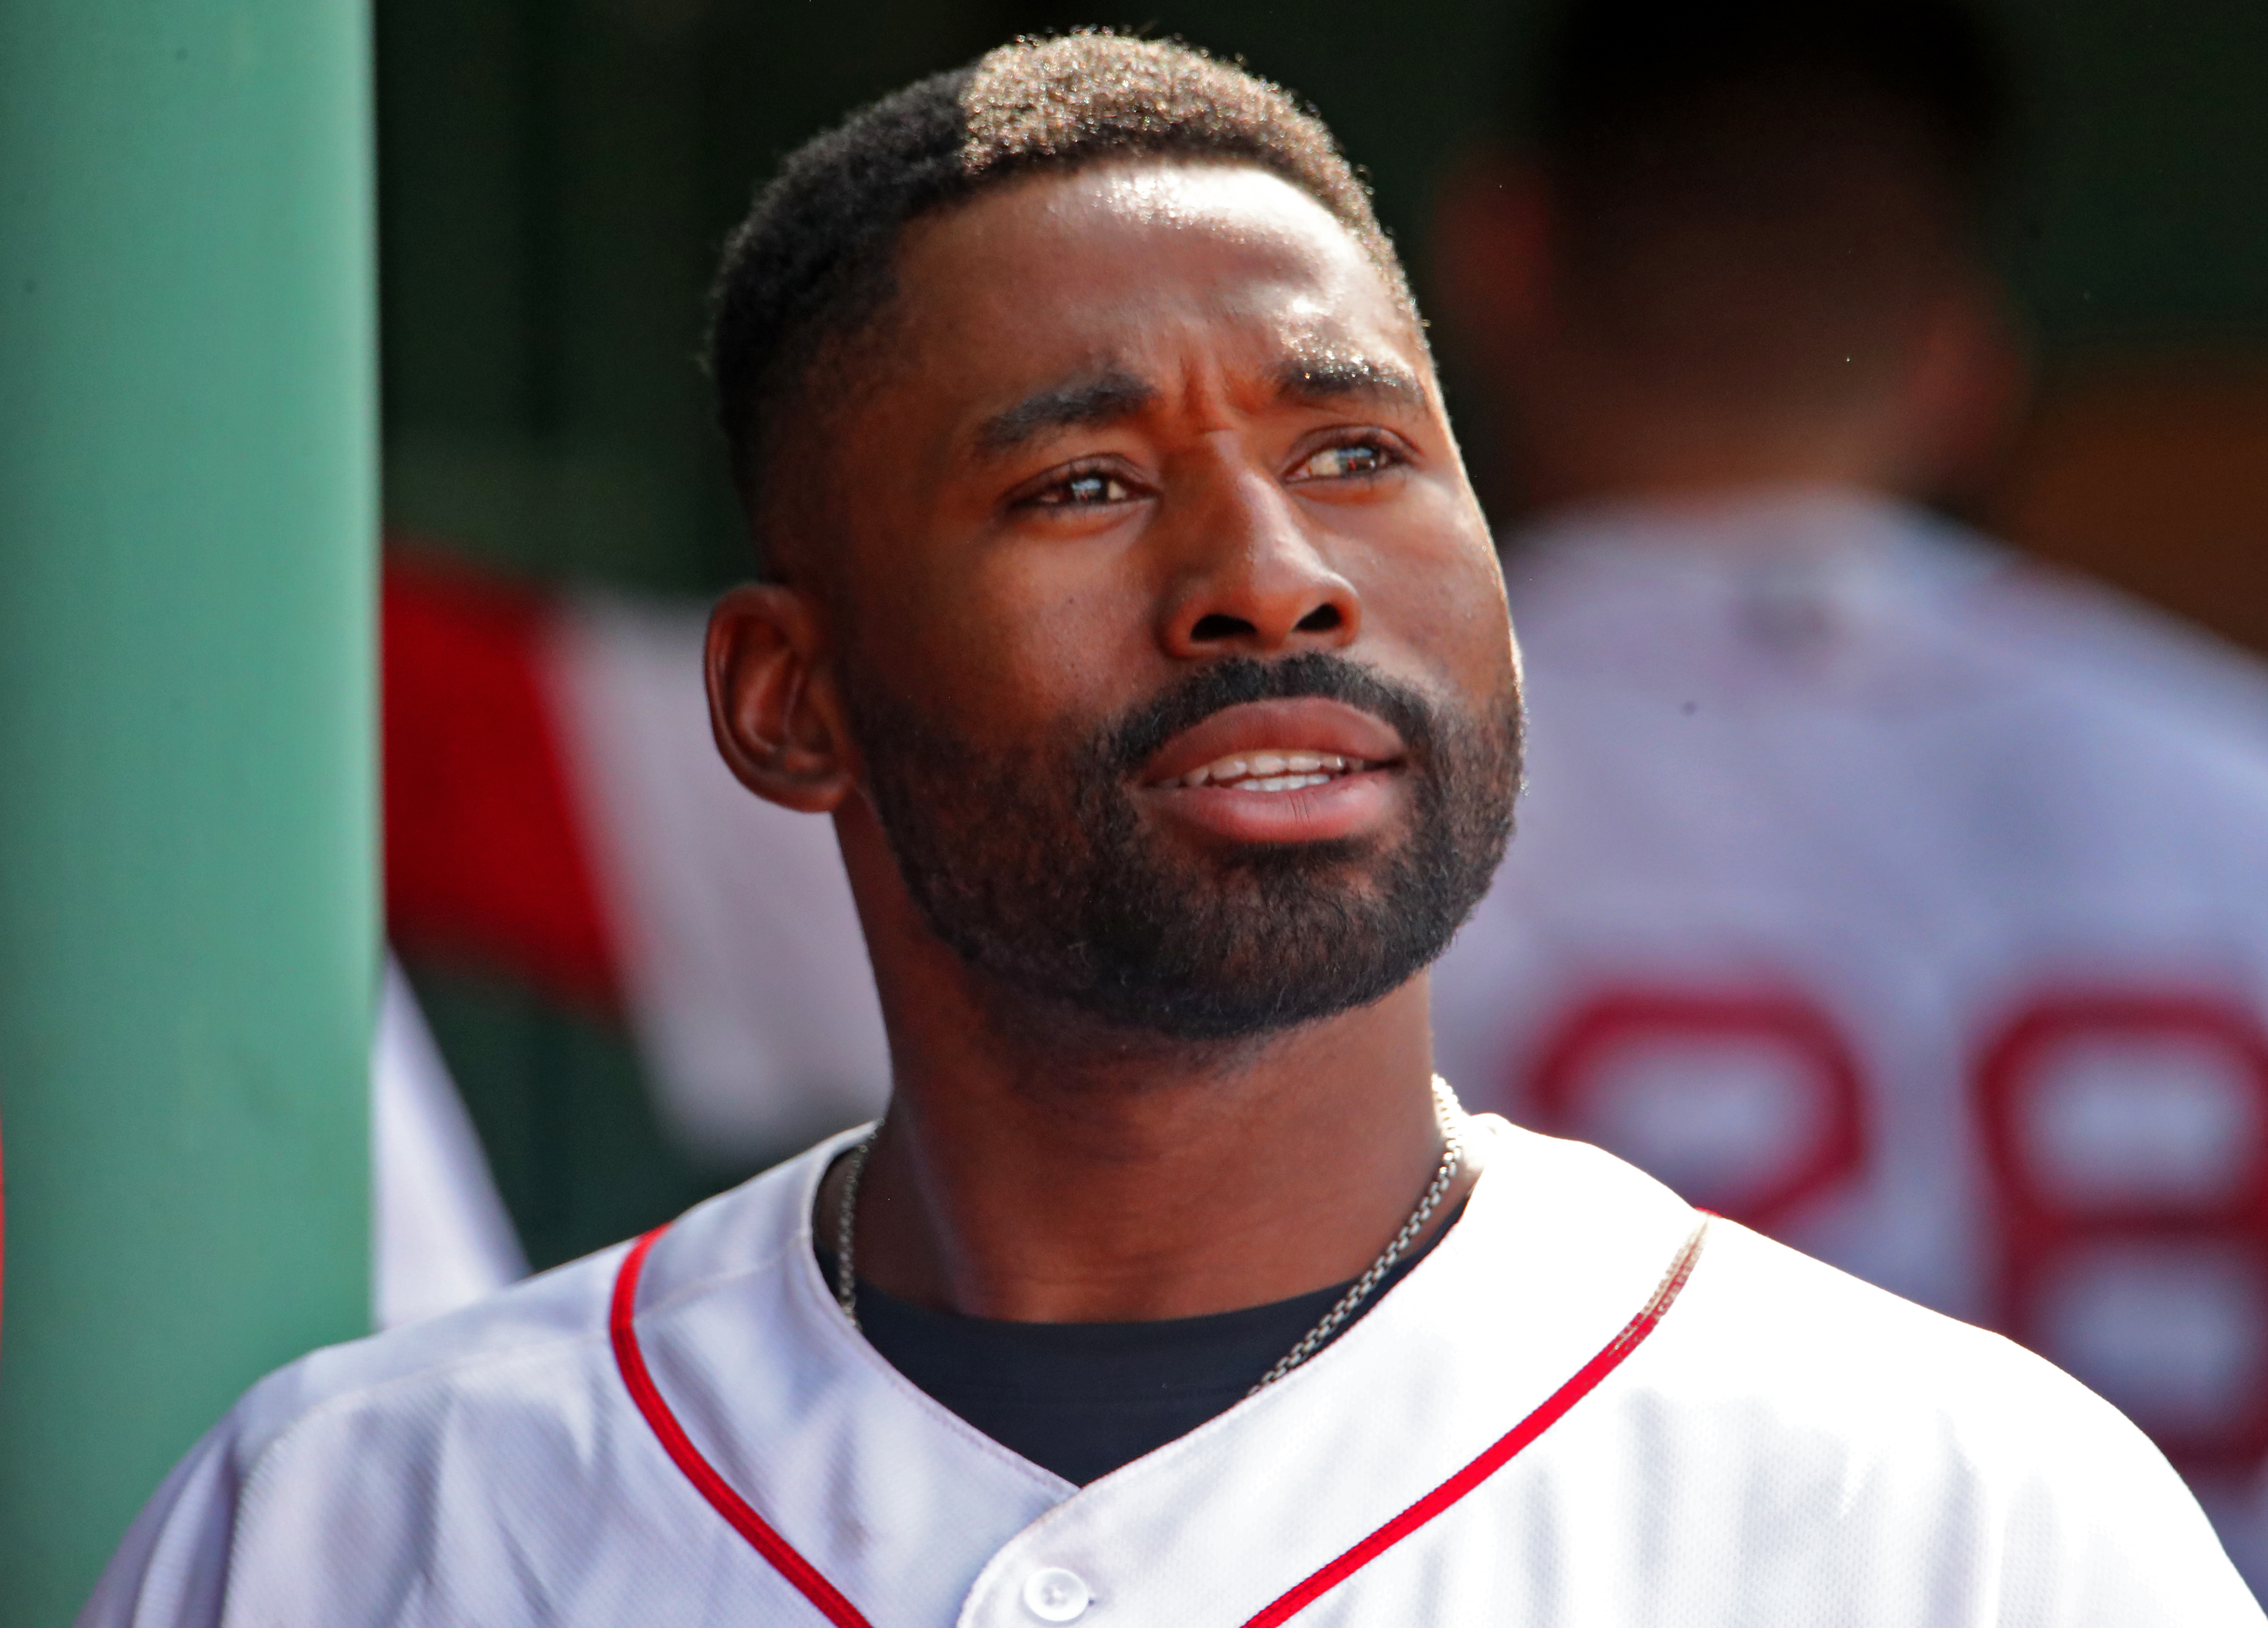 Jackie Bradley Jr. agrees to a two-year, $24 million deal with